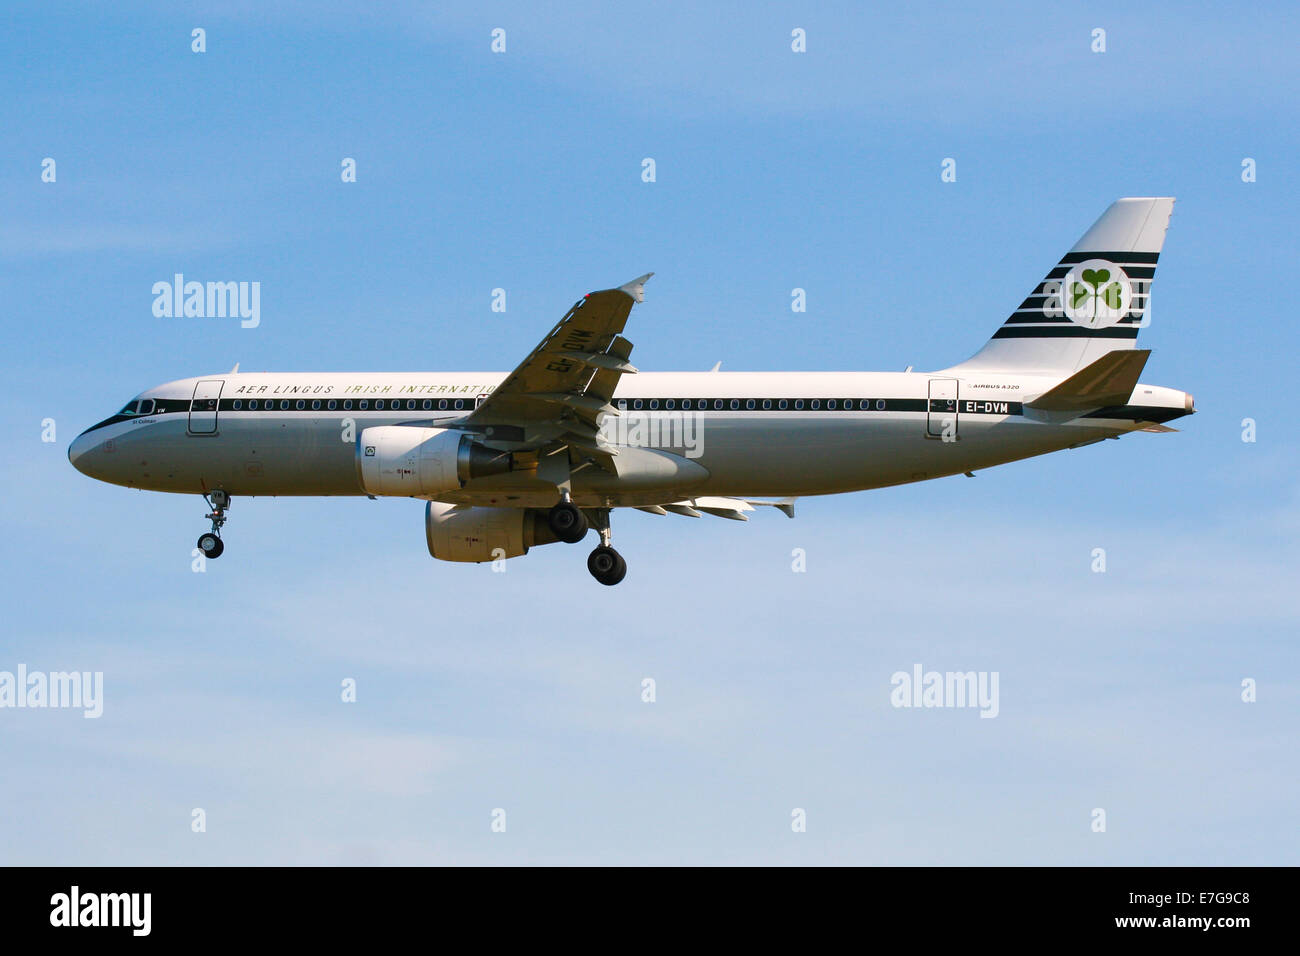 Aer Lingus (Retro) Airbus A320 approaches runway 27L at London Heathrow airport. Stock Photo